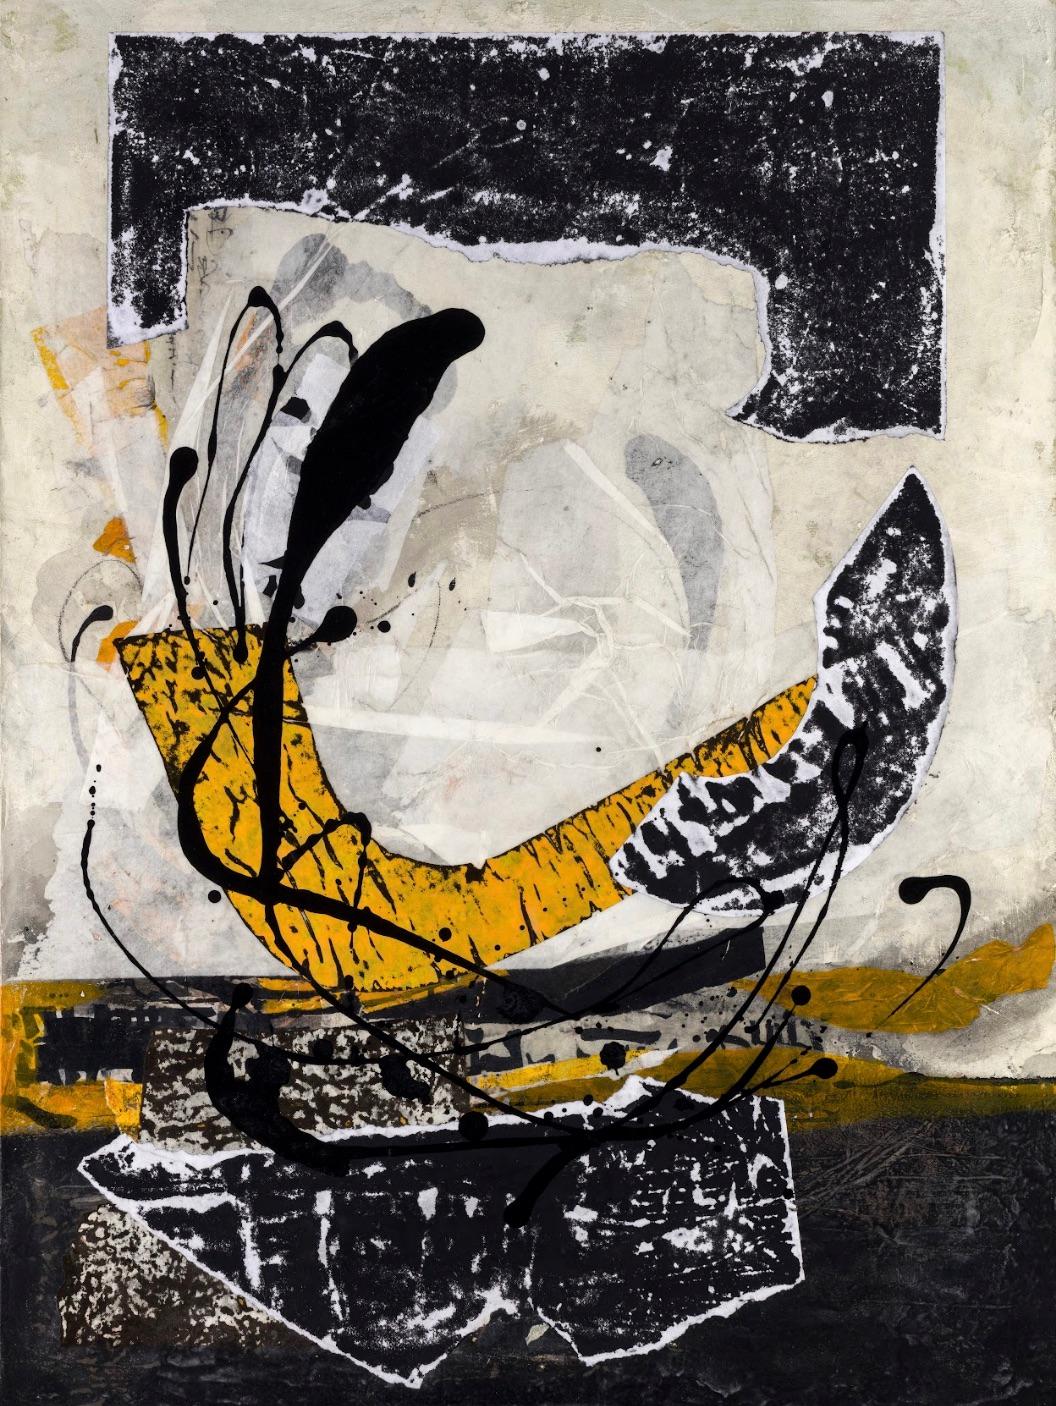 Lorraine Lawson’s "Year of the Tiger" is a striking 48" x 36" mixed media creation that captures the spirit and vivacity of its namesake. Utilizing a refined palette of monochromatic tones punctuated with bold yellows and blacks, Lawson weaves a